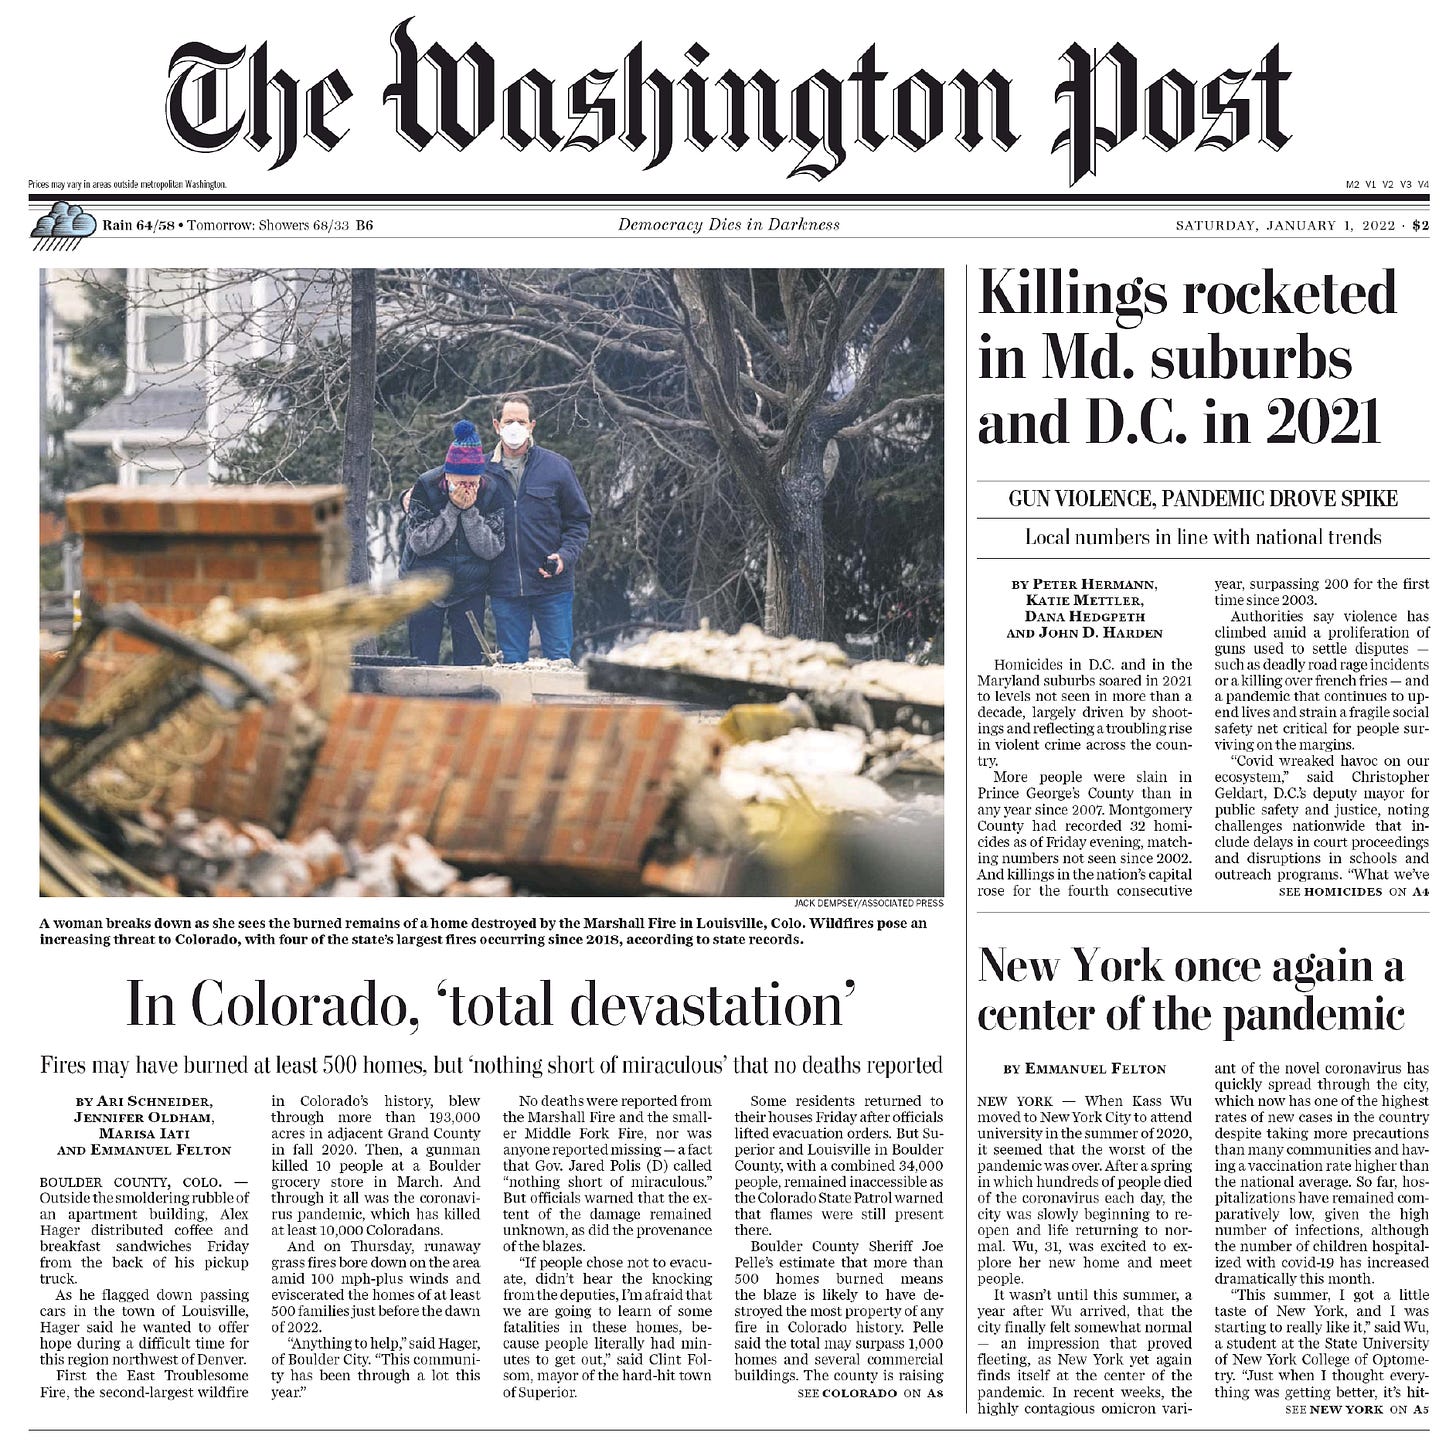 Front page of The Washington Post on New Year's Day 2022